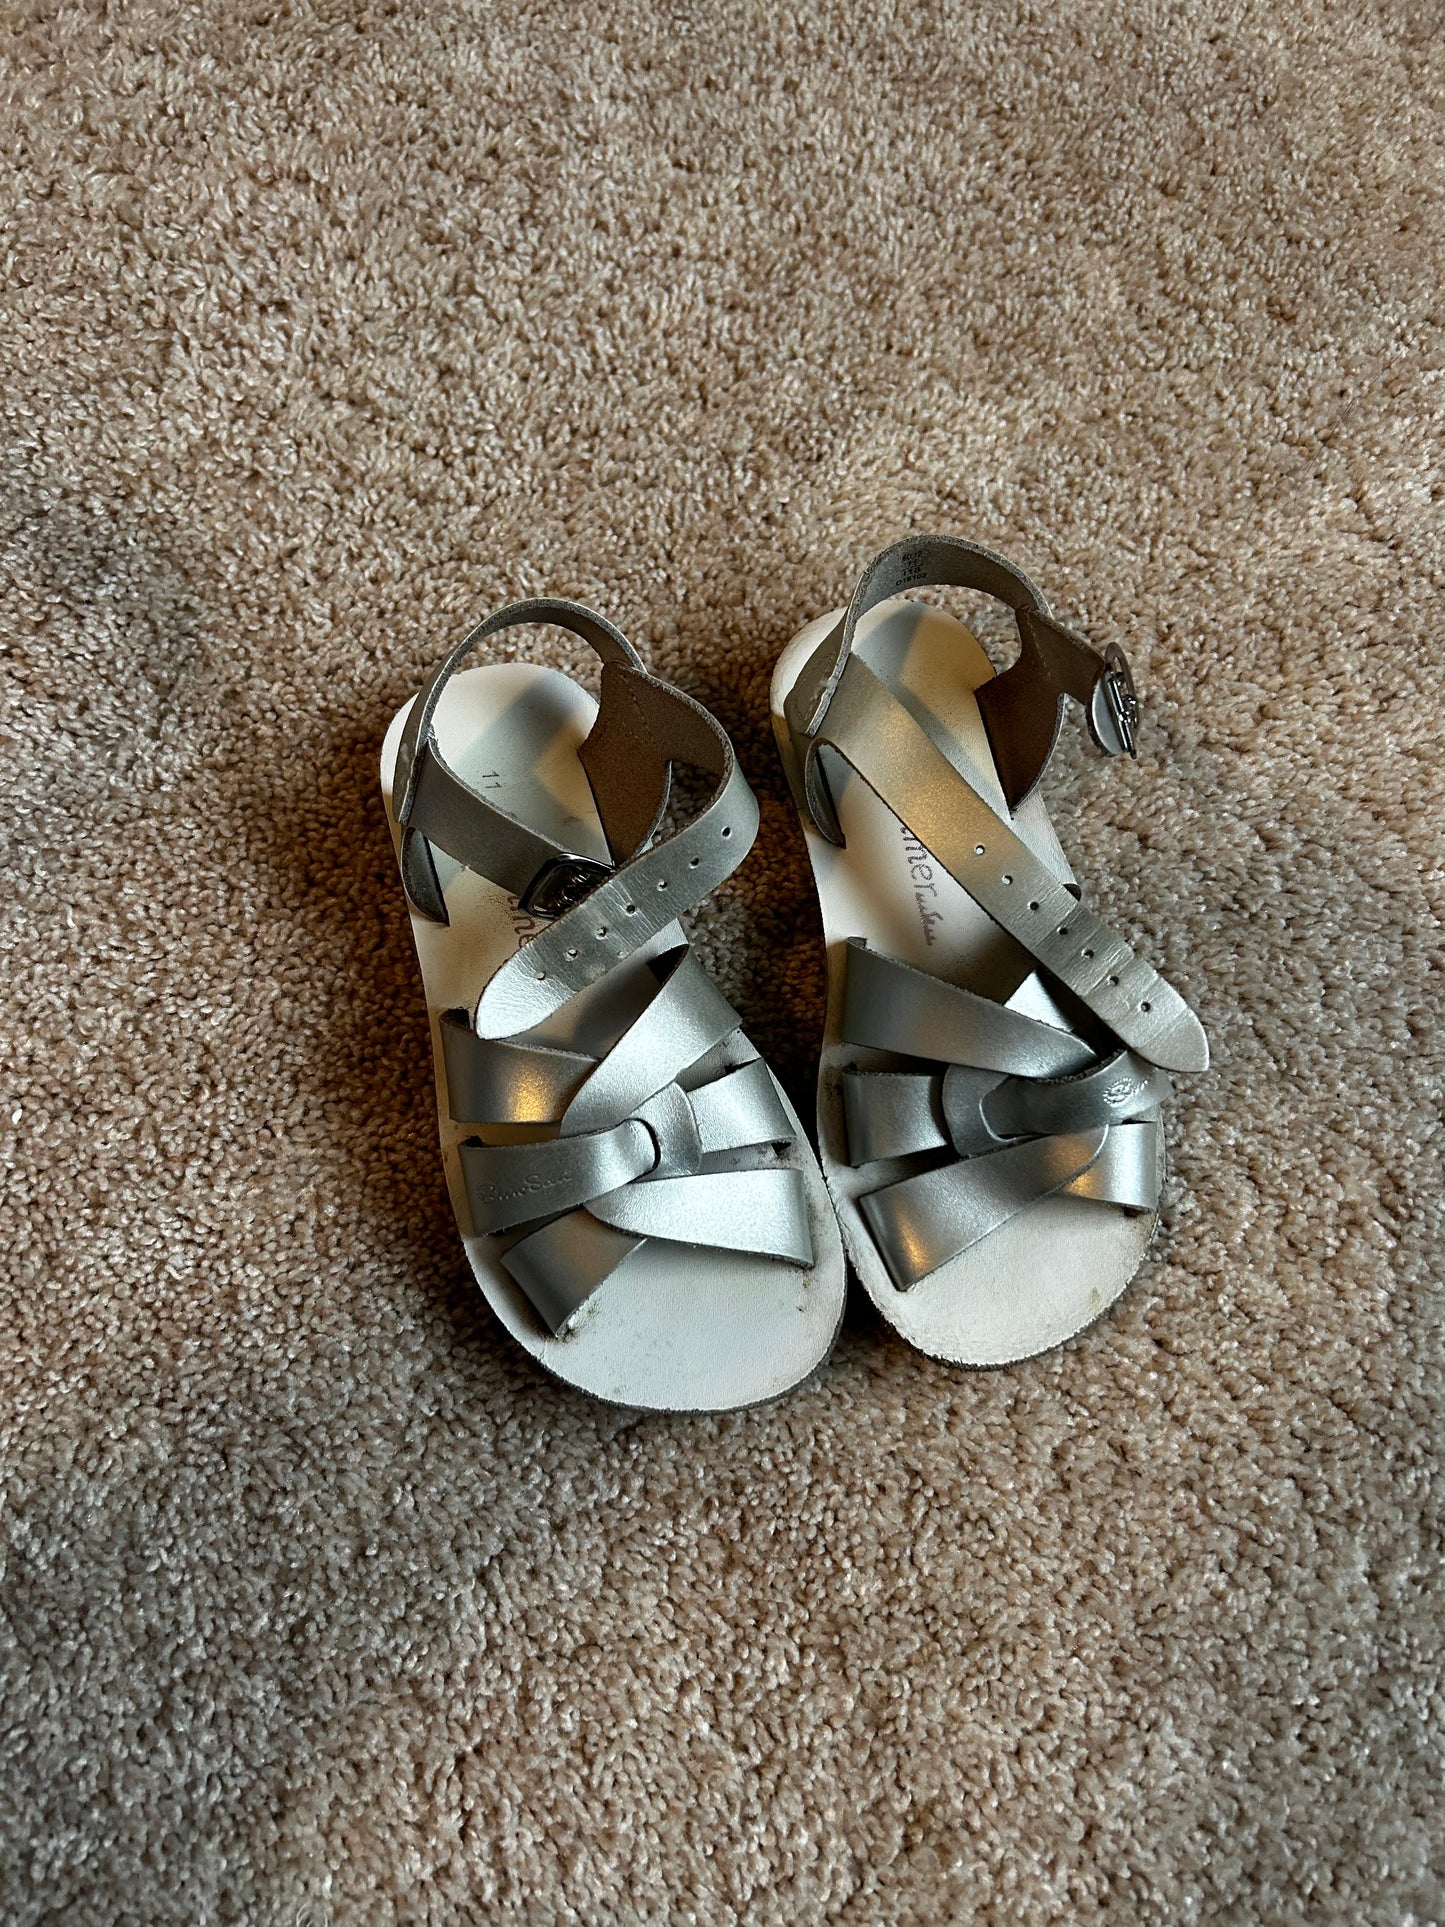 Sun and San size 11 sandals